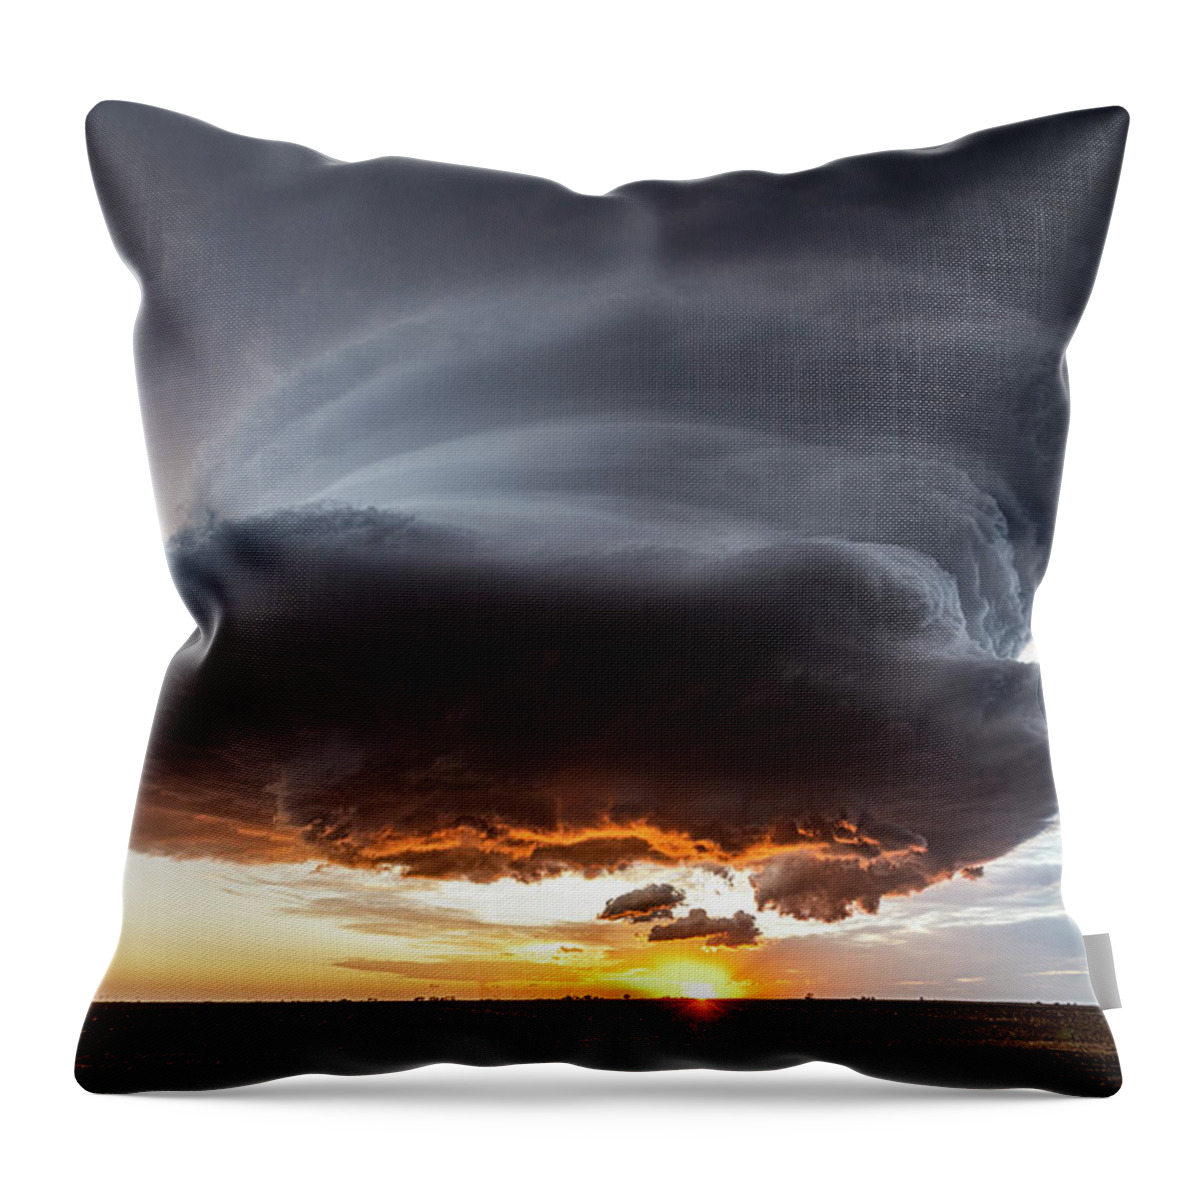 Sunset Throw Pillow featuring the photograph Sunset Mothership by Marcus Hustedde